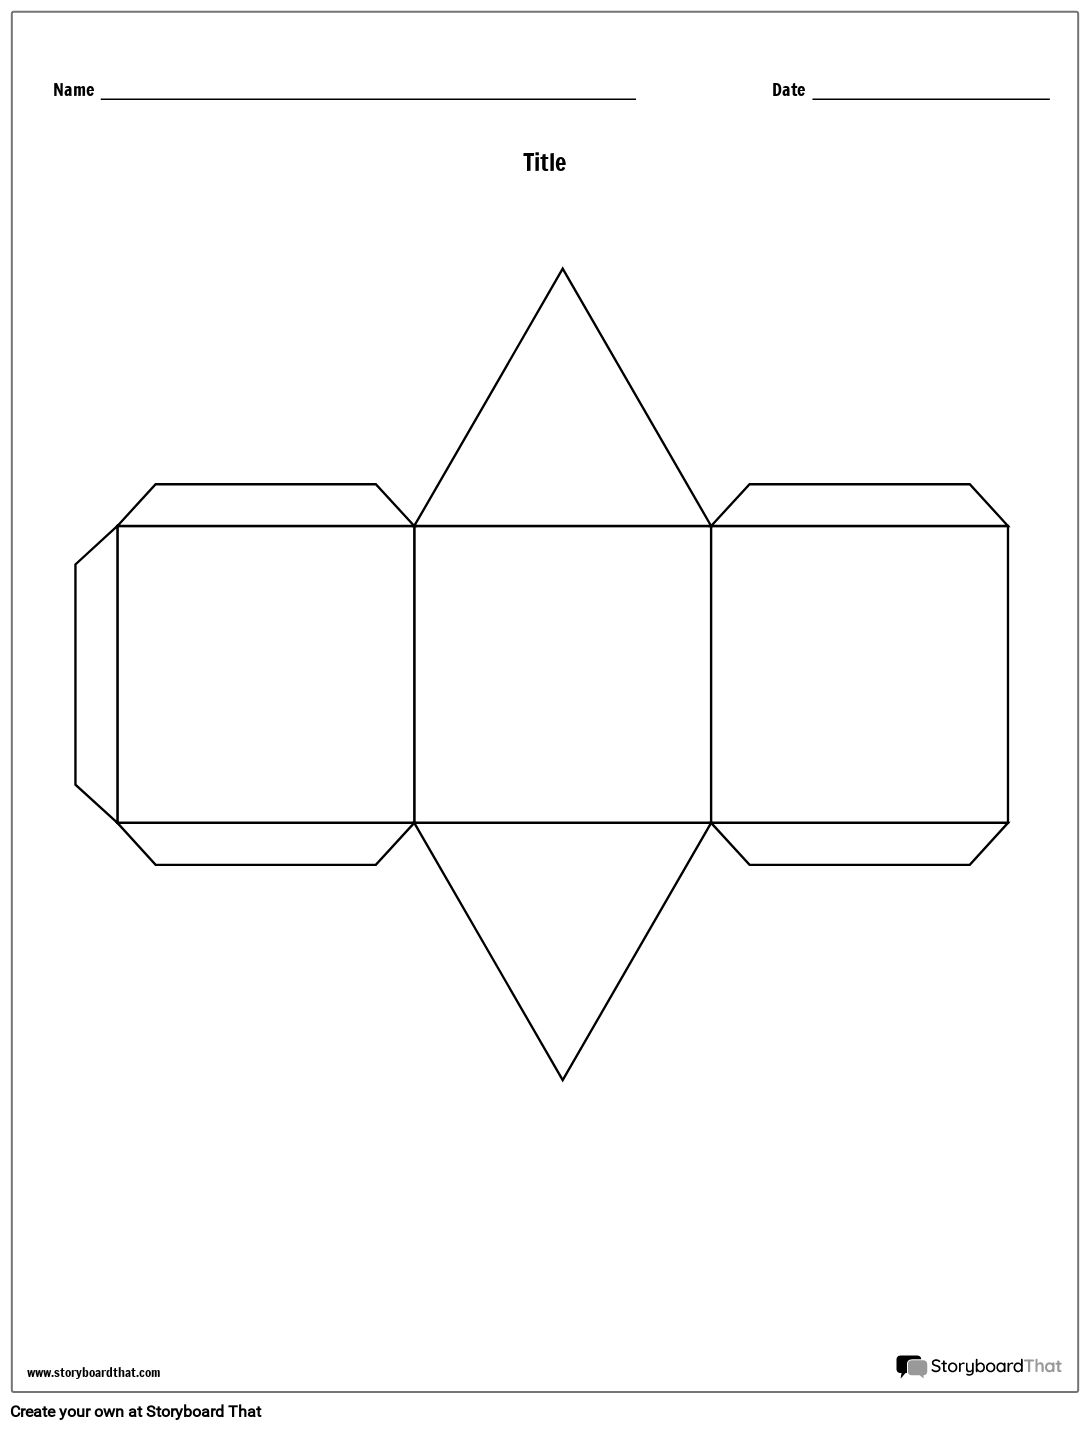 Triangular Prism Story Cube Template Storyboard